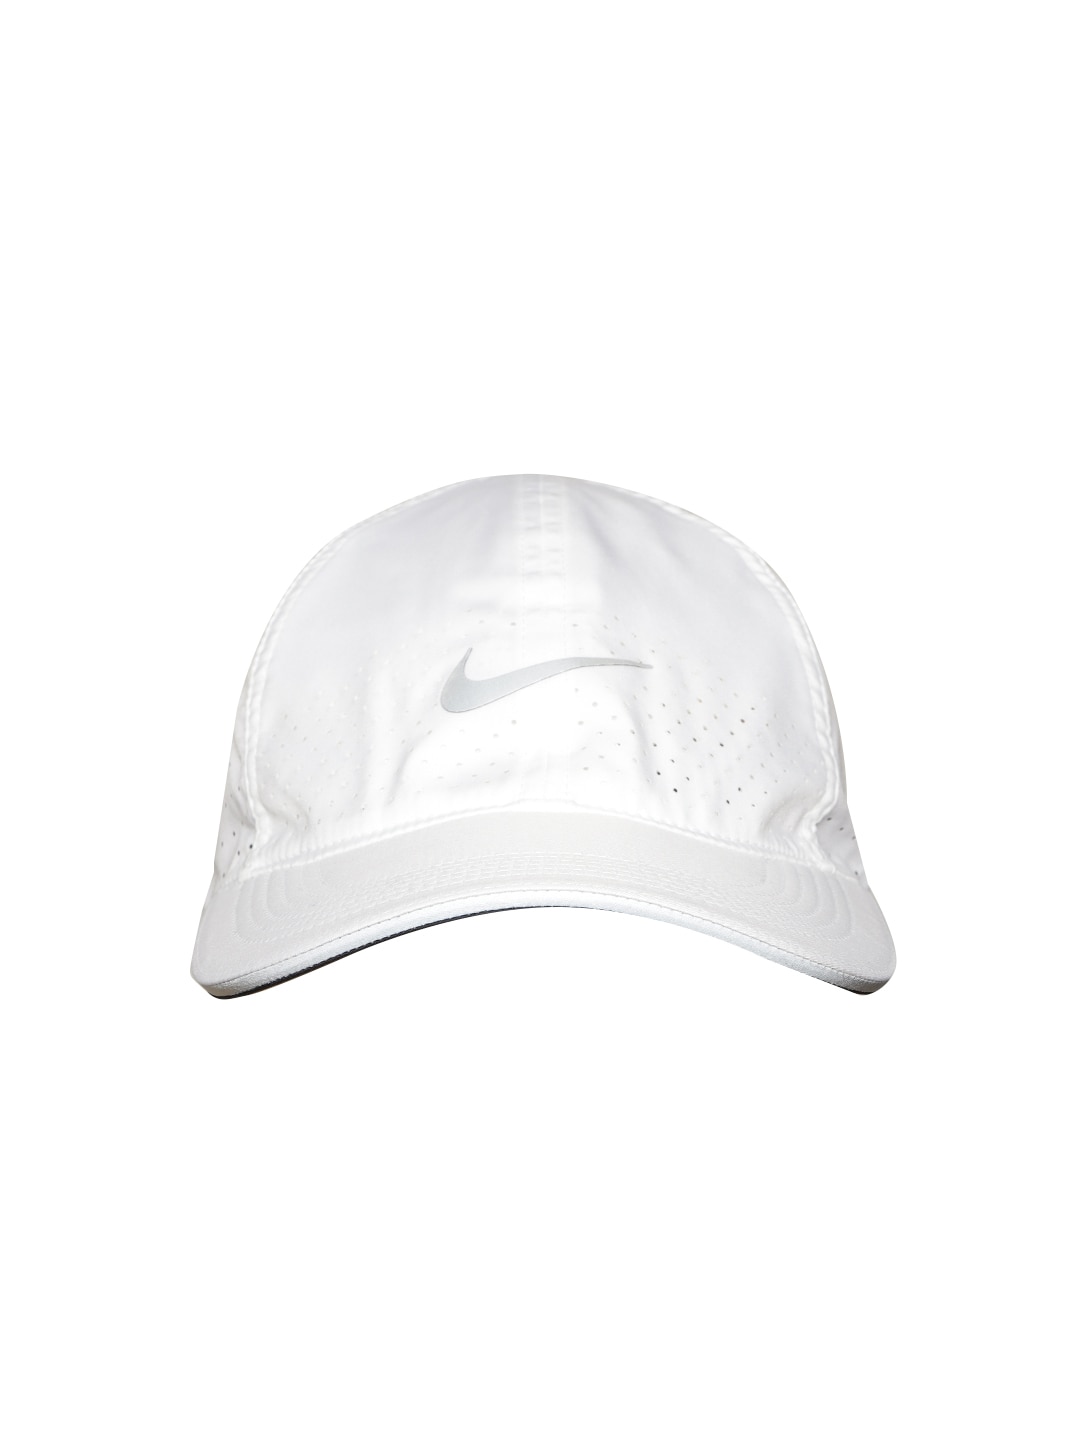 Nike Unisex White U NK DF Aerobill Fthlt Baseball Cap with Perforations Price in India